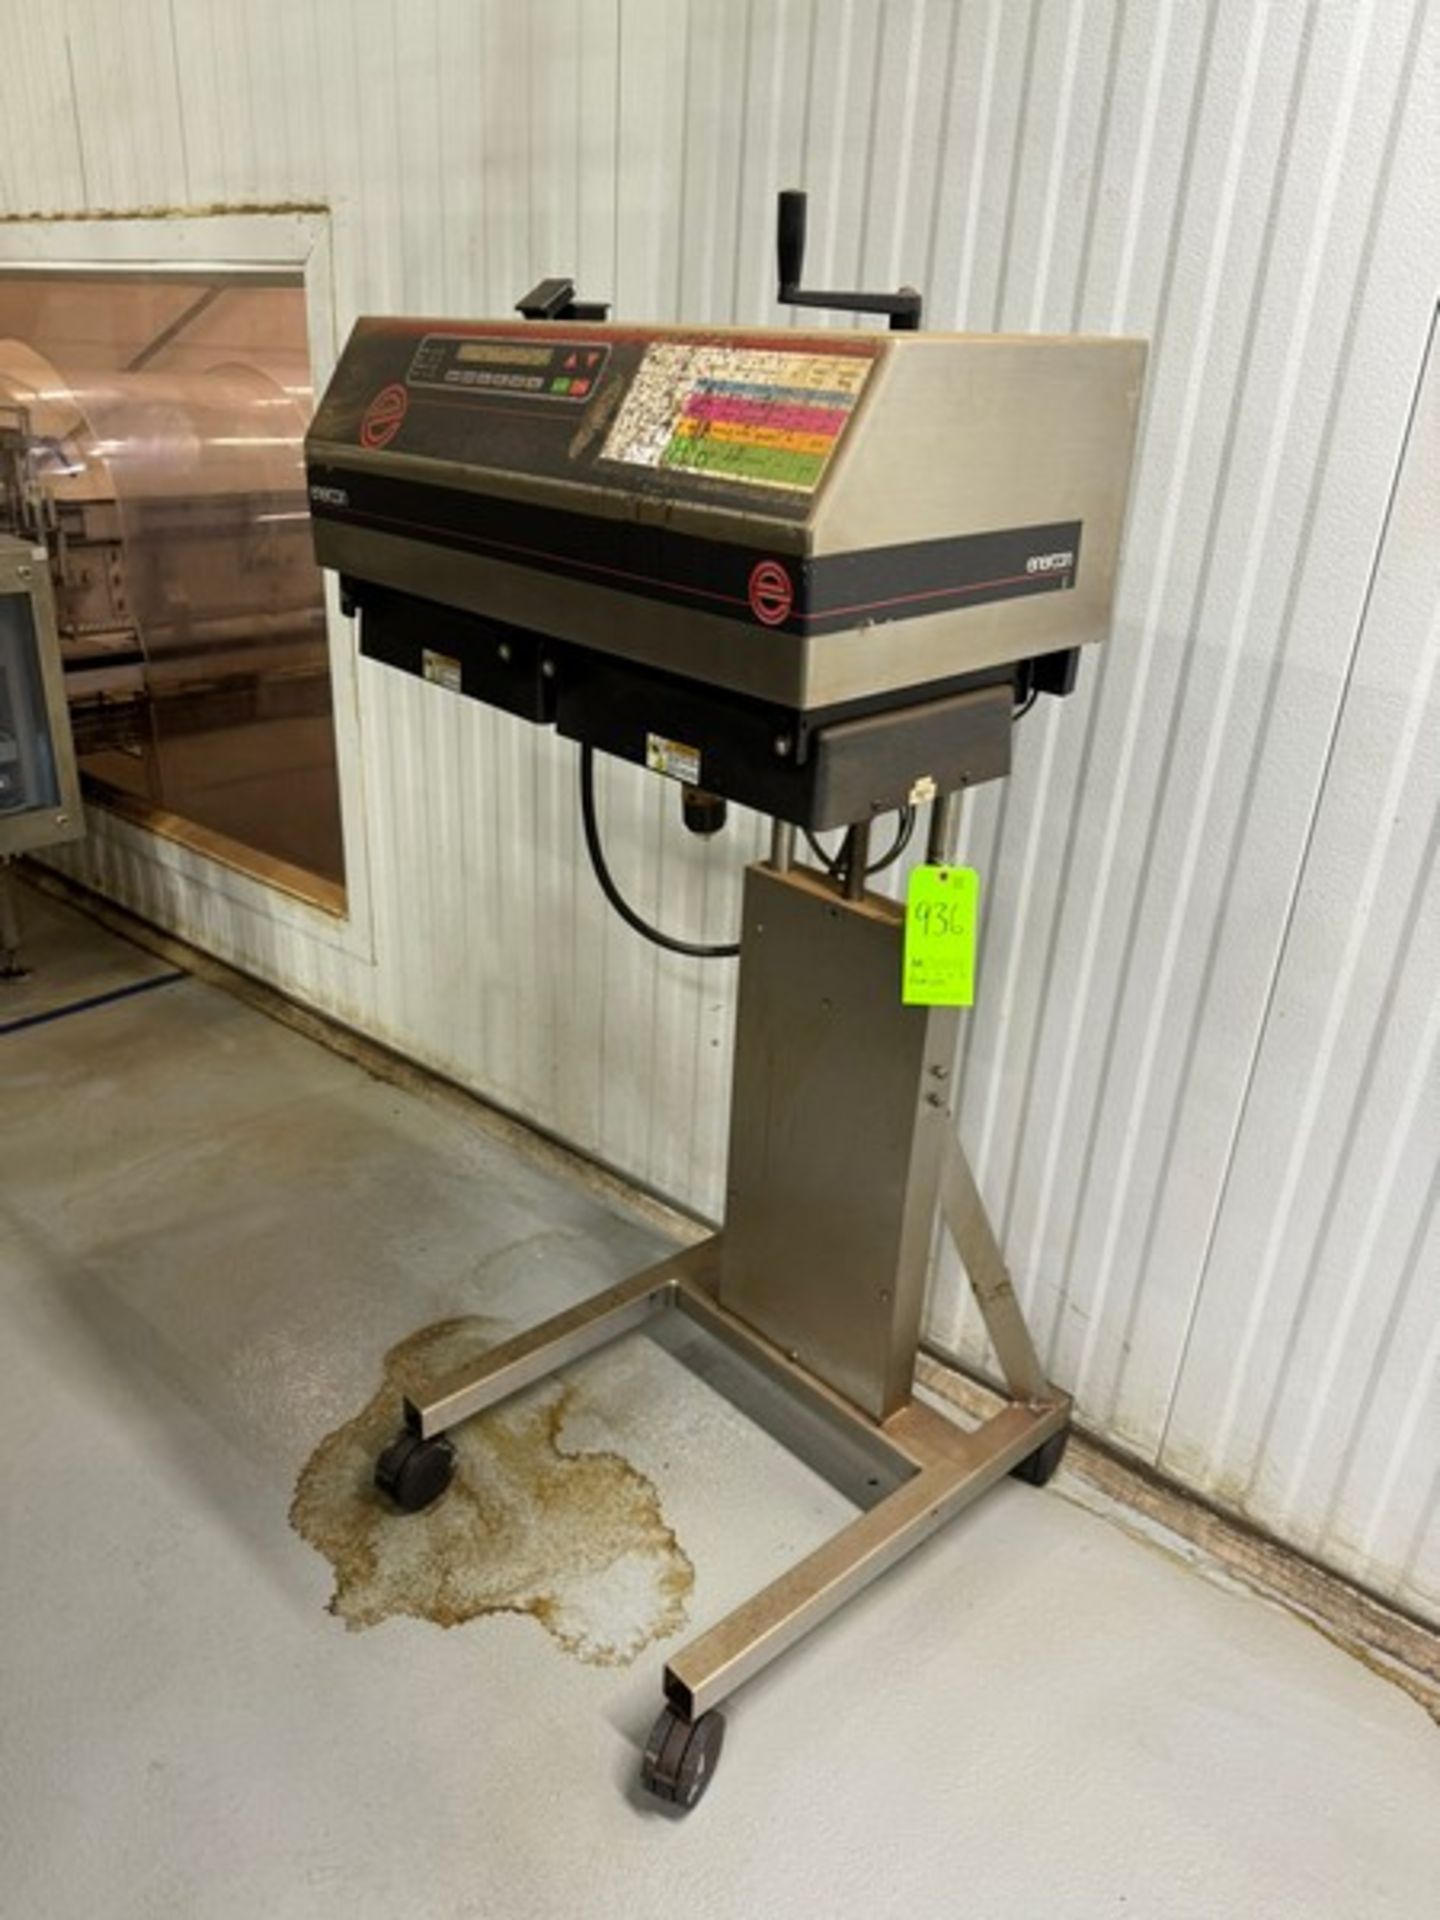 2014 Emerson Superseal Max Sealer, M/N LM4989-46, S/N 111756-2-1, 208 Volts, Mounted on Portable